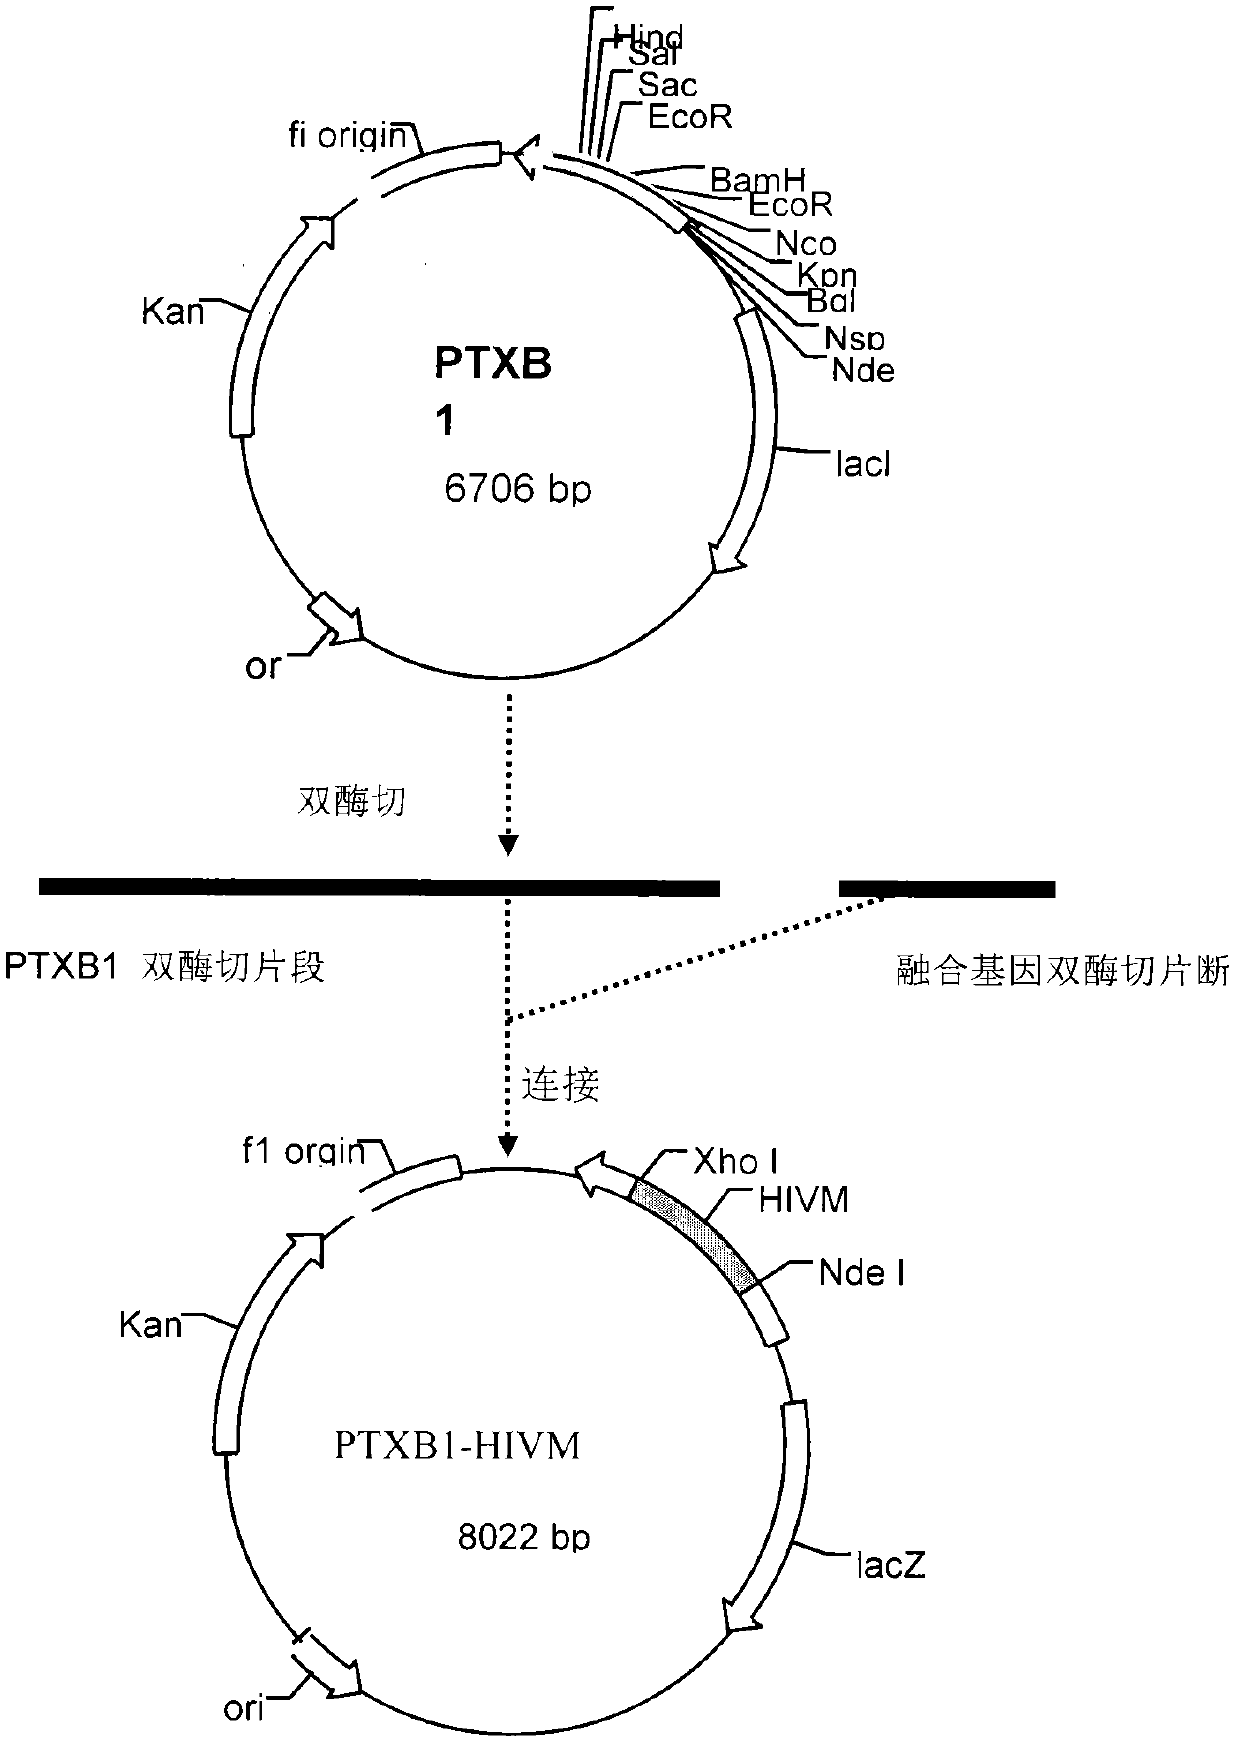 Novel HIV recombined multi-epitope fusion antigen and application thereof